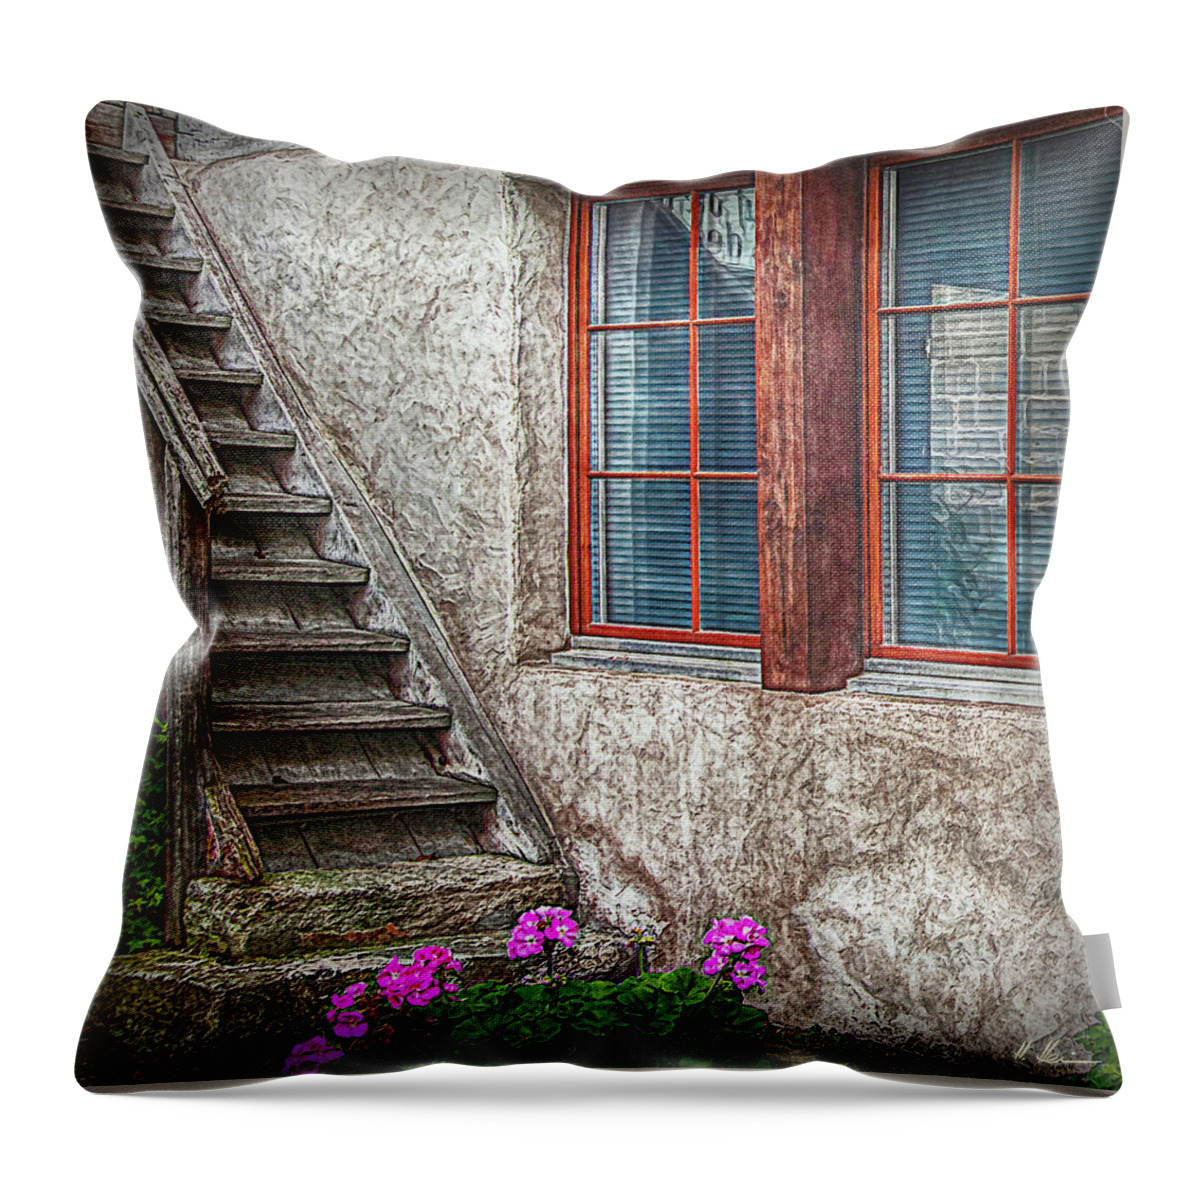 Switzerland Throw Pillow featuring the photograph The timbre Stair by Hanny Heim